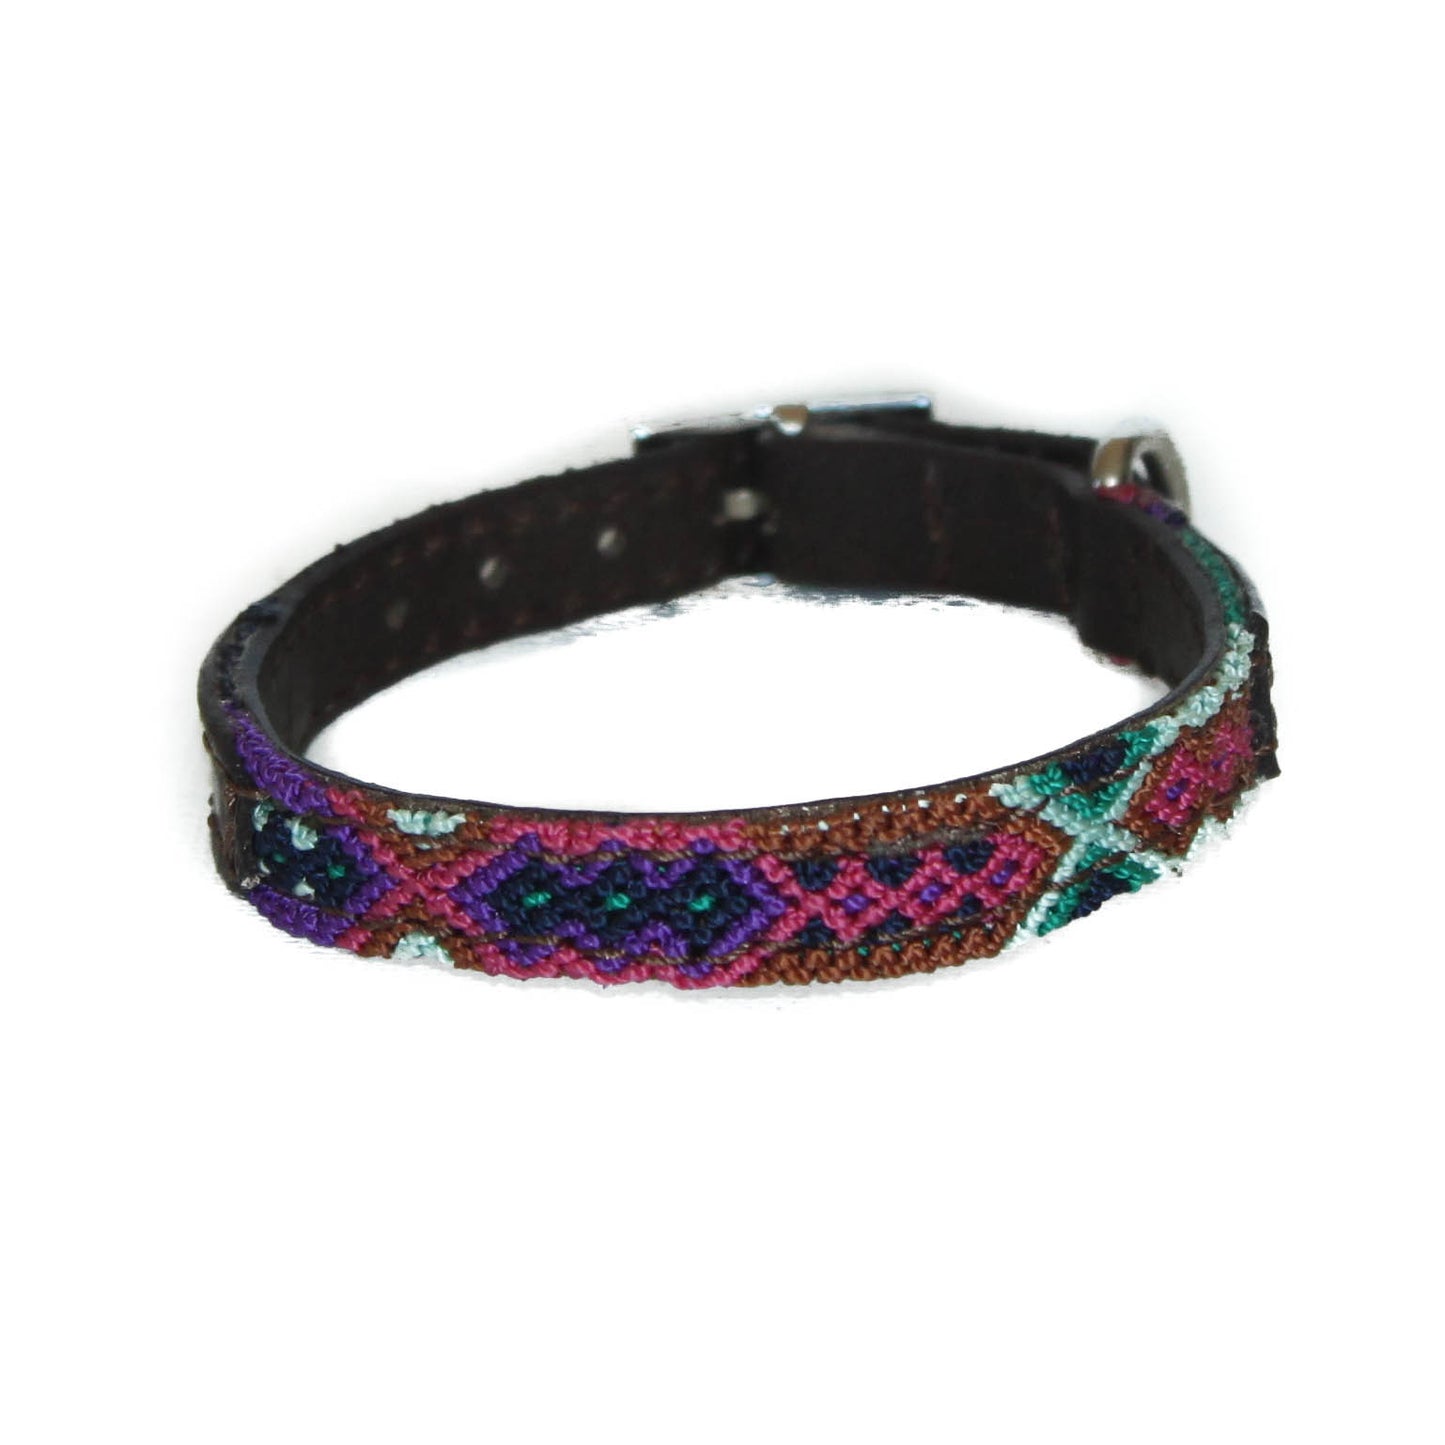 Pastel - Embroidered Dog Collar With Leather